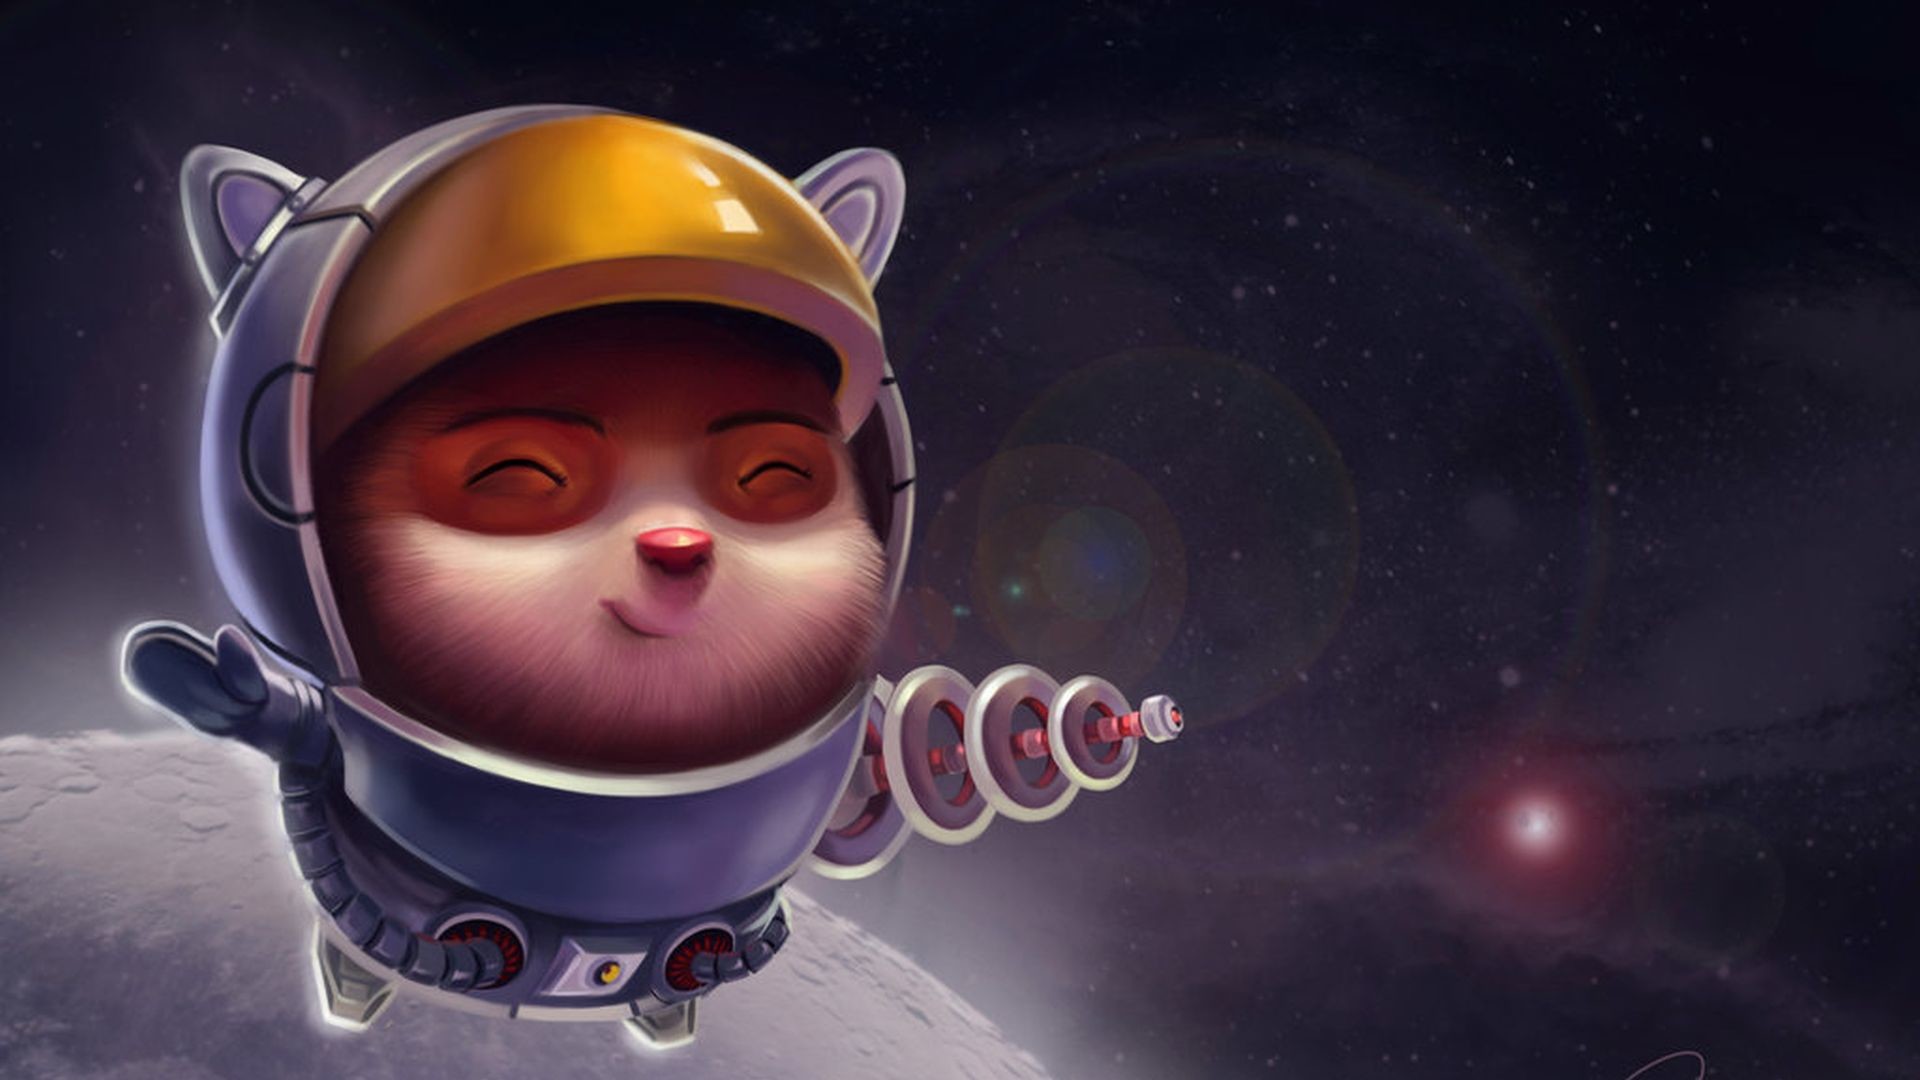 1920x1080 just some random teemo wallpapers i discovered.